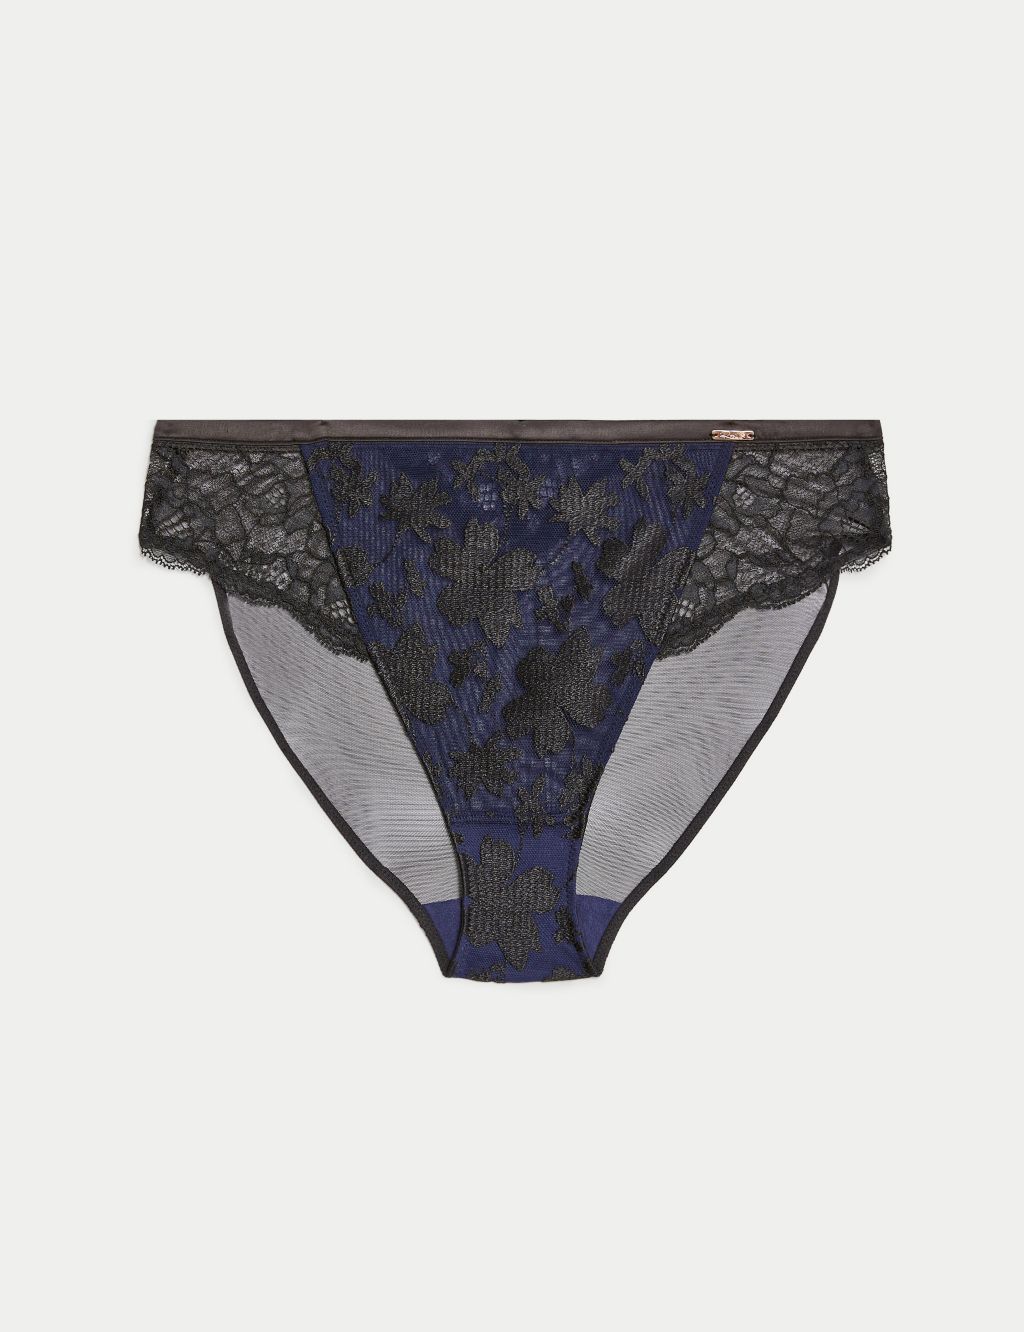 Cosmos Embroidery High Leg Knickers image 2